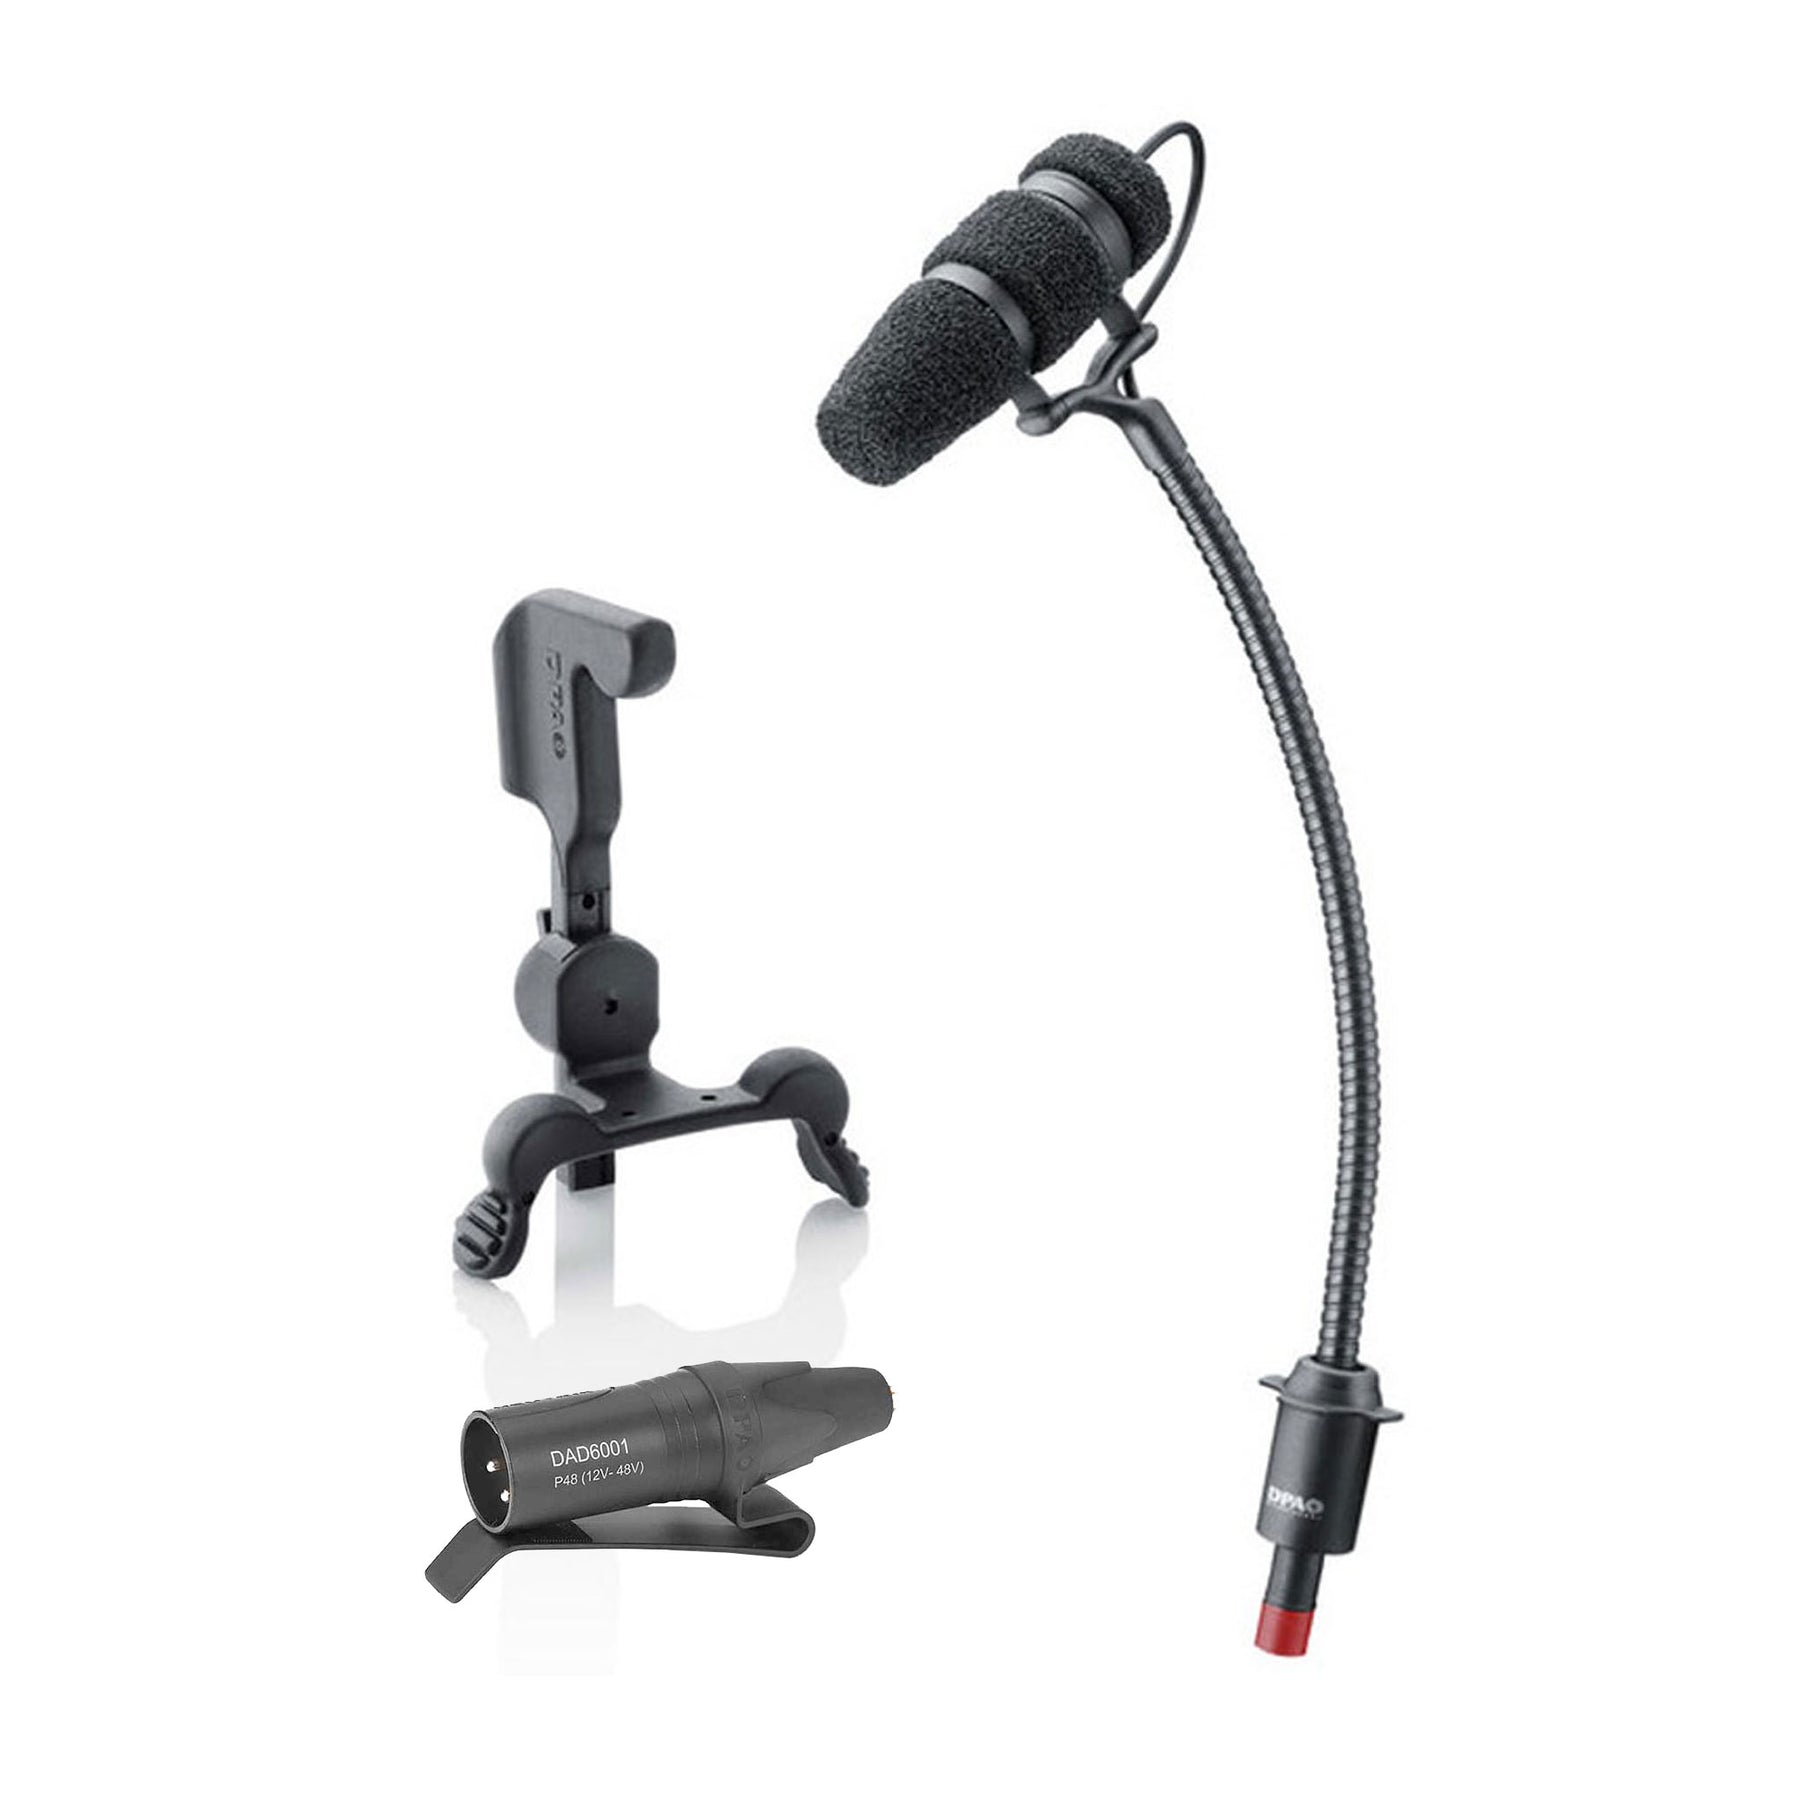 DPA 4099 Microphone with Violin Mounting Clip